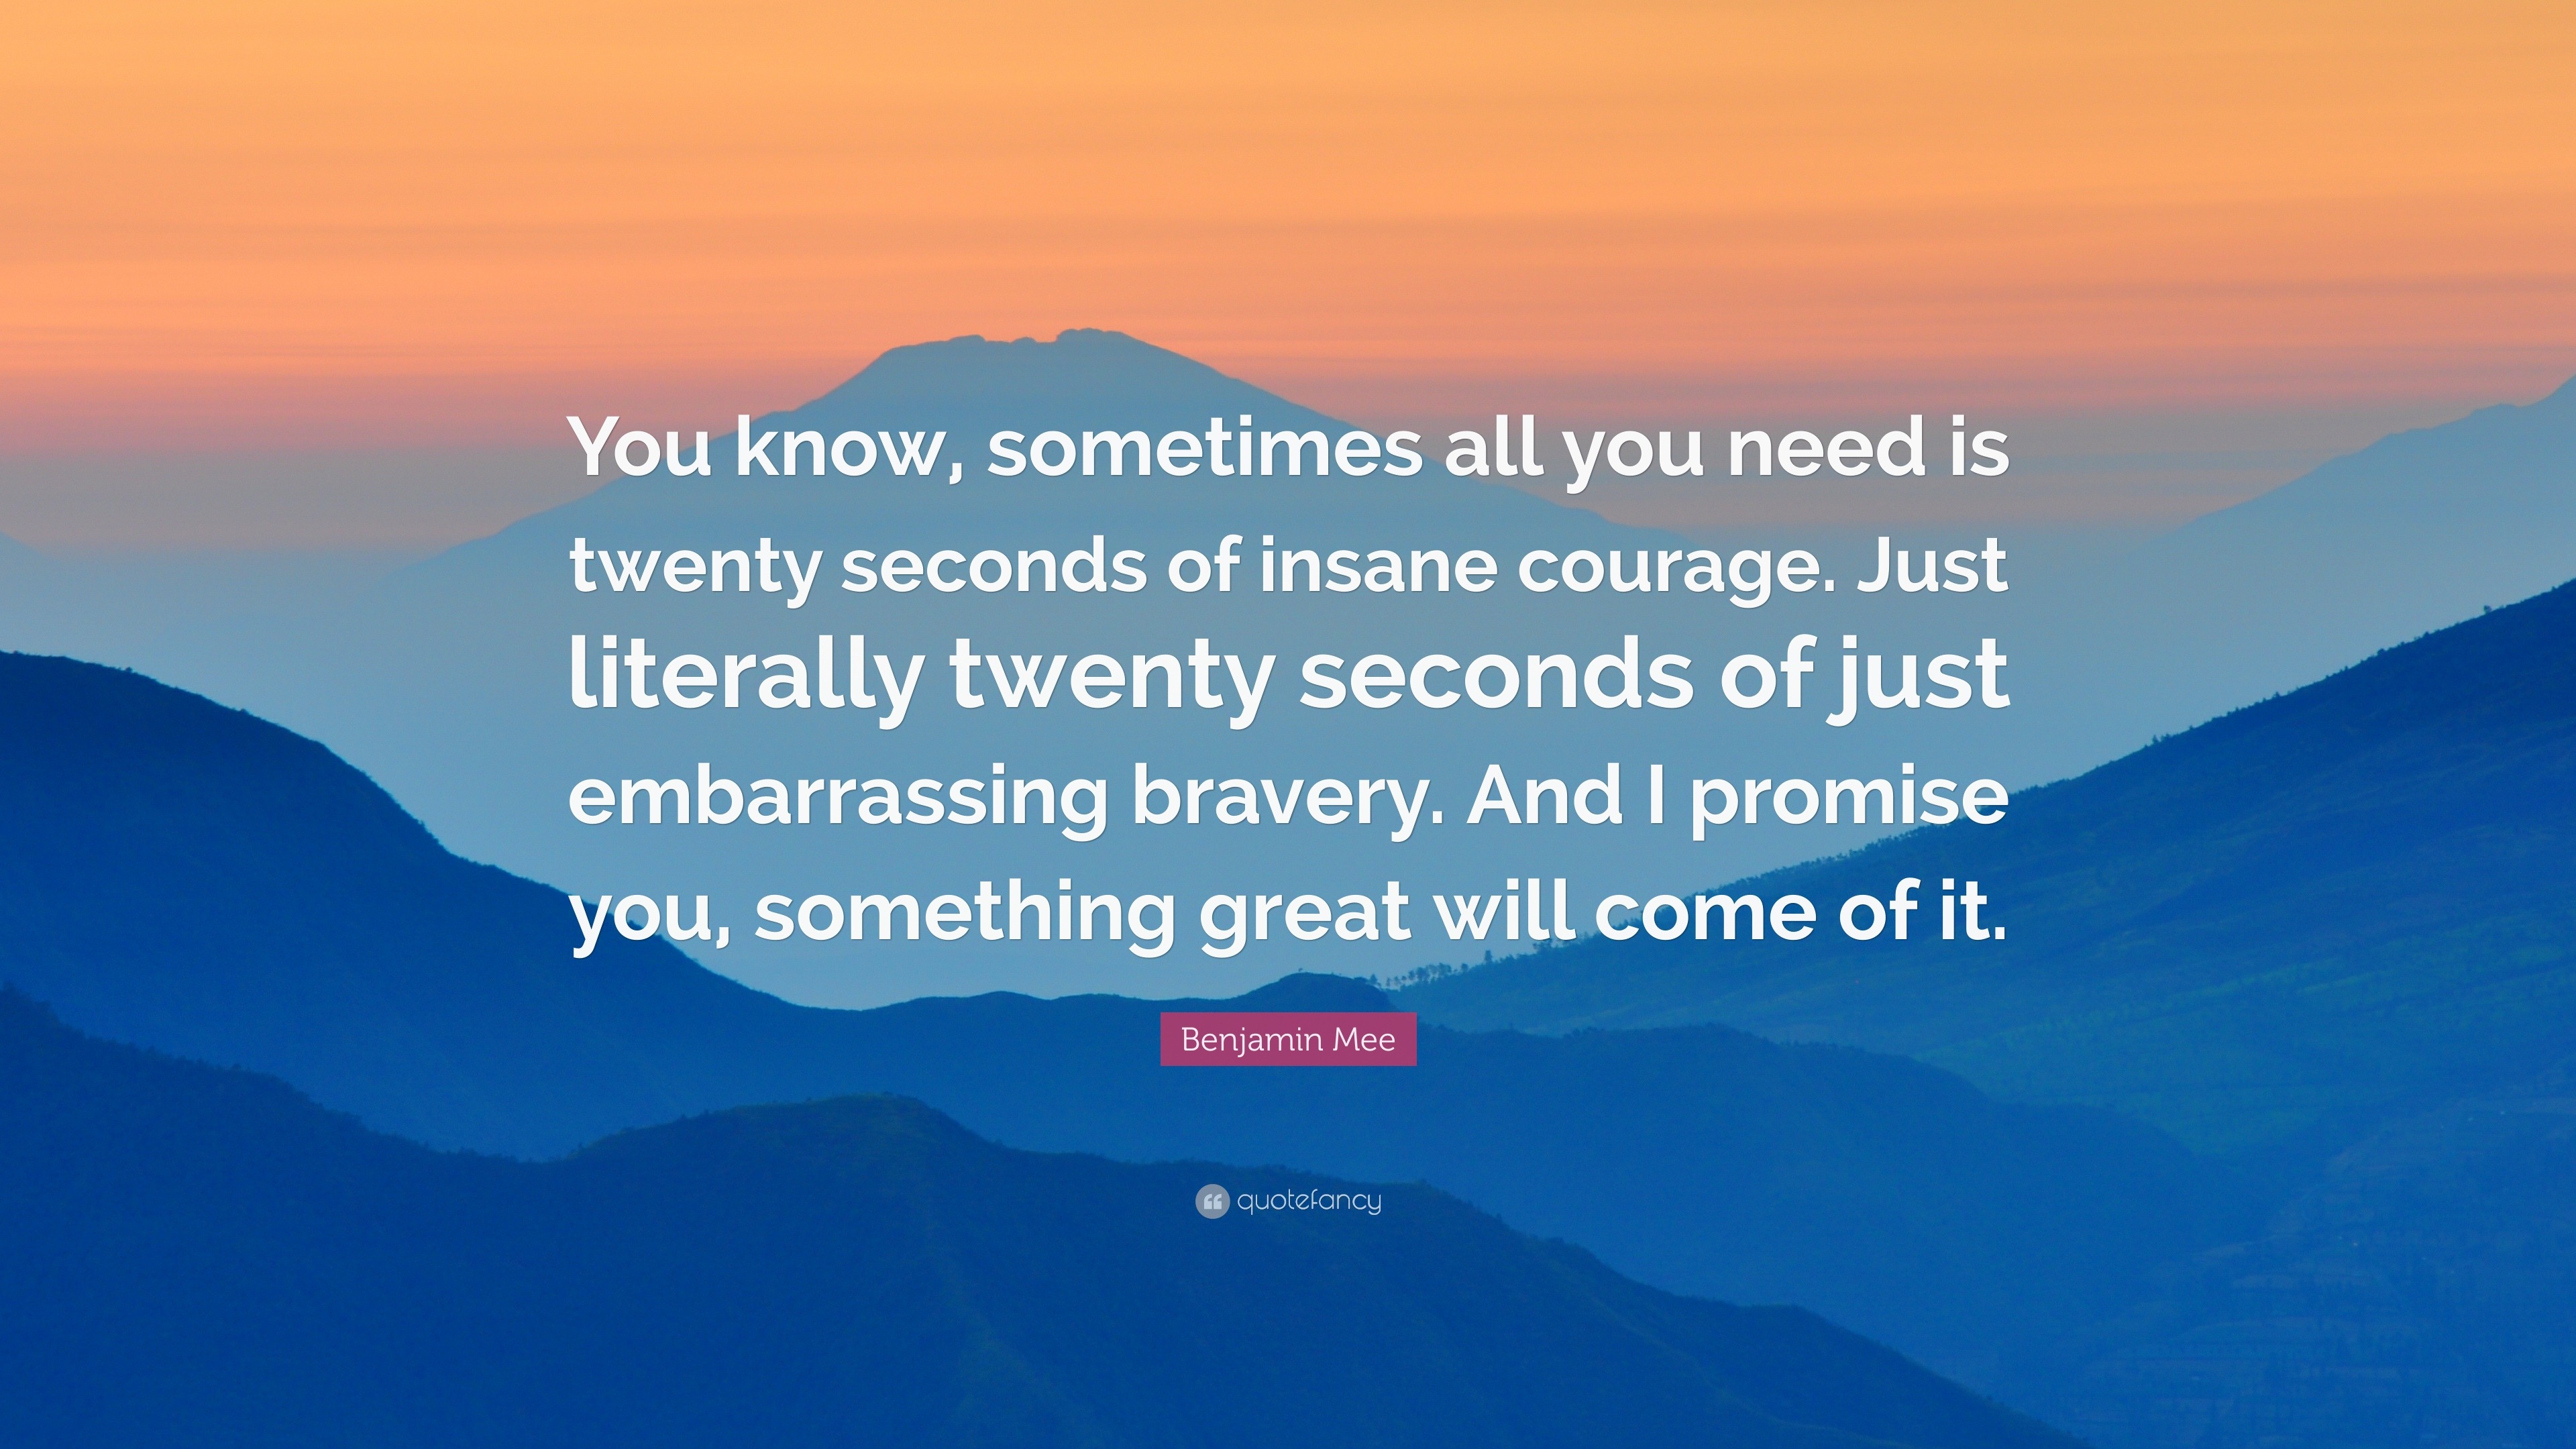 Benjamin Mee Quote: “You know, sometimes all you need is twenty seconds